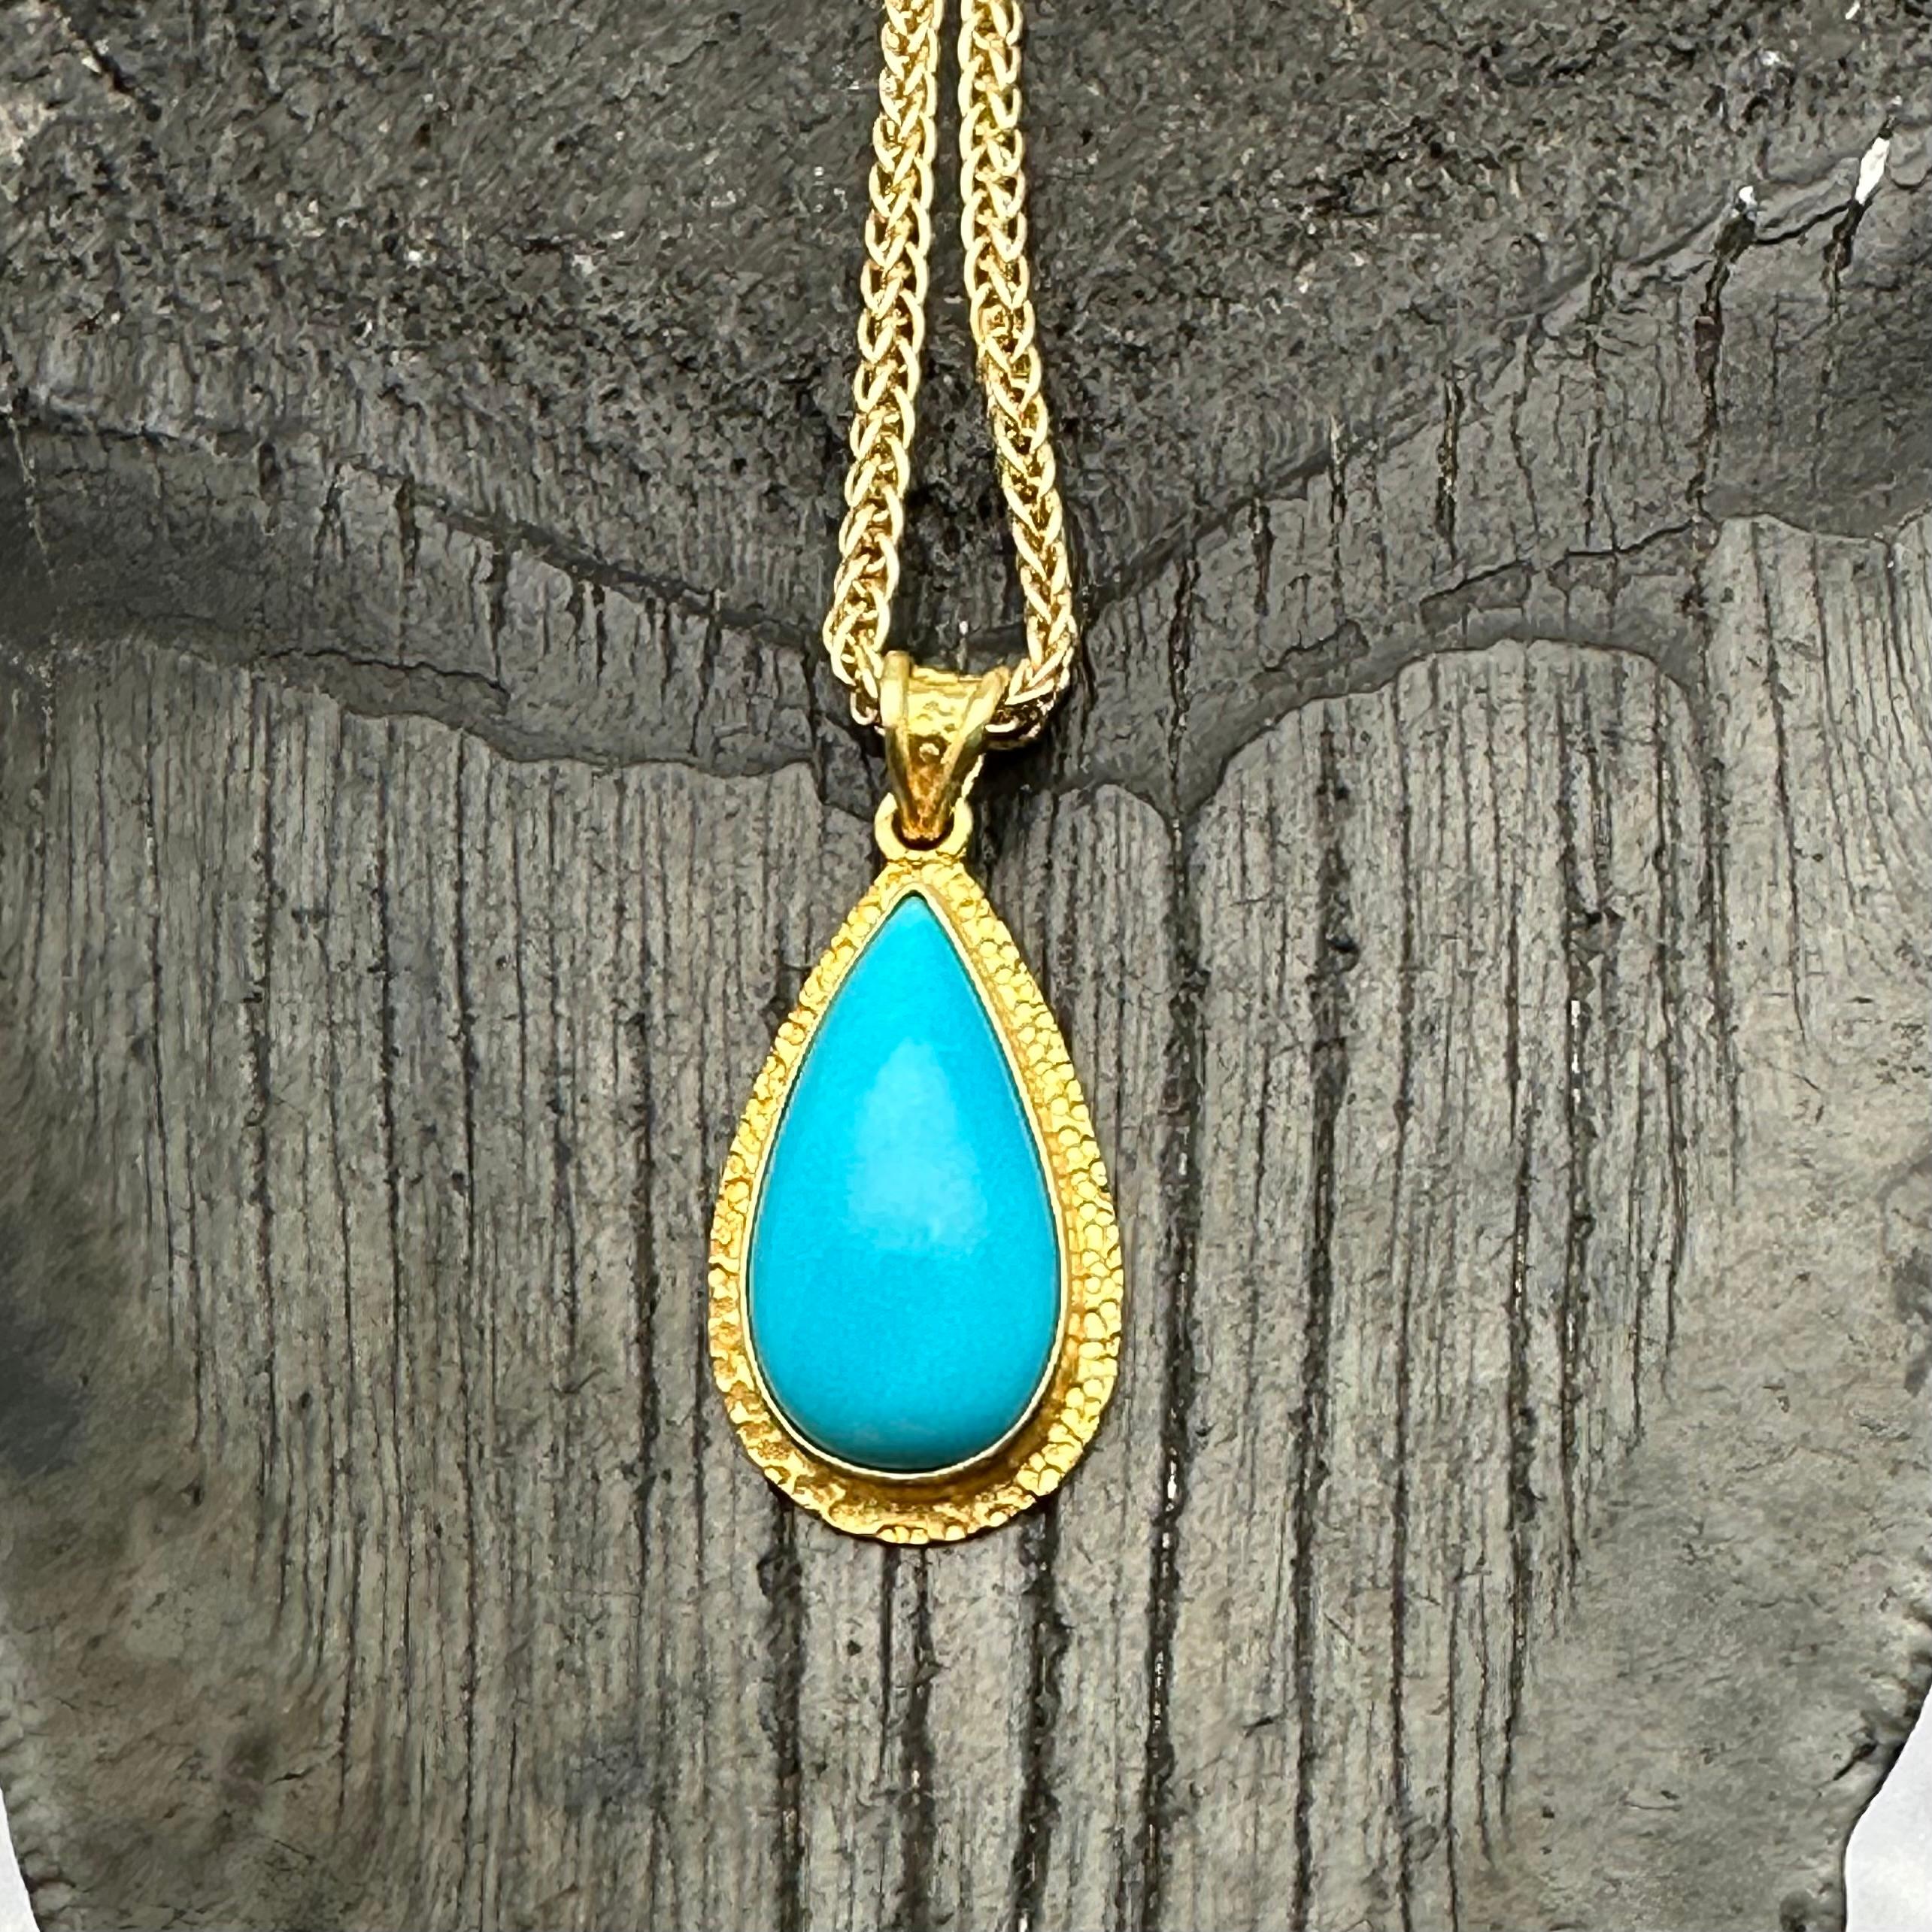 Steven Battelle 4.8 Carats Sleeping Beauty Turquoise 18k Gold Pendant In New Condition For Sale In Soquel, CA